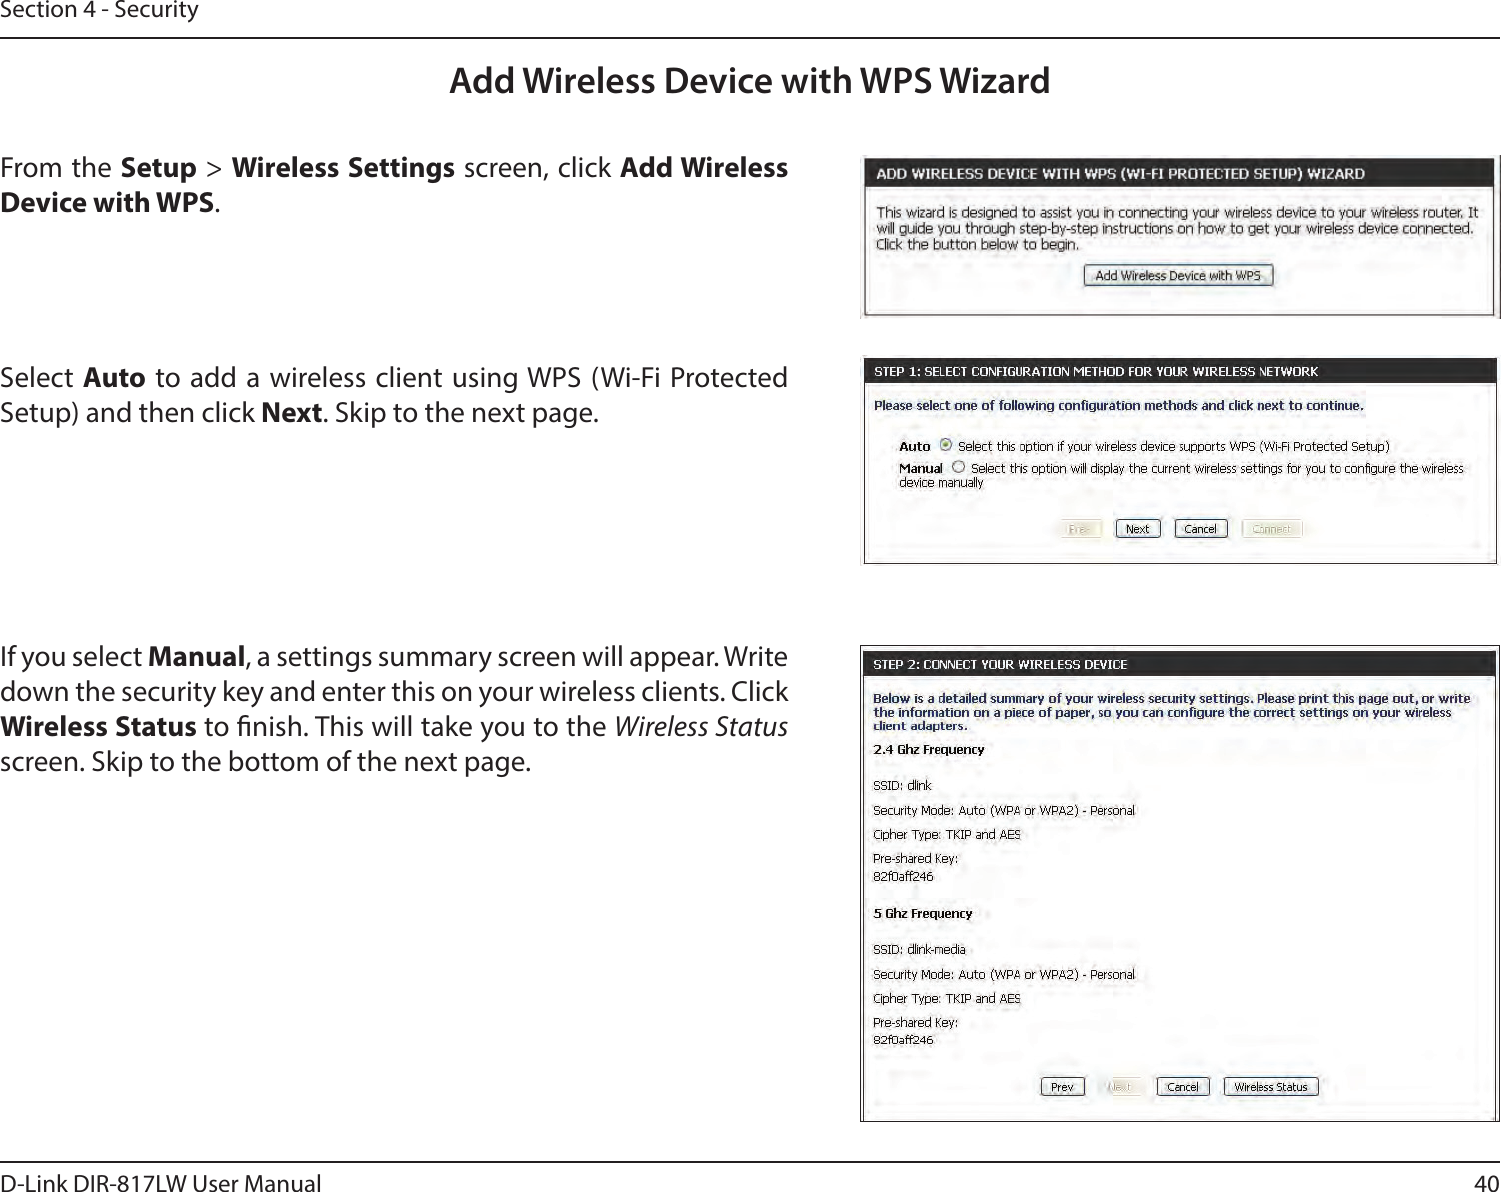 40D-Link DIR-817LW User ManualSection 4 - SecurityFrom the Setup &gt; Wireless Settings screen, click Add Wireless Device with WPS.Add Wireless Device with WPS WizardIf you select Manual, a settings summary screen will appear. Write down the security key and enter this on your wireless clients. Click Wireless Status to nish. This will take you to the Wireless Status screen. Skip to the bottom of the next page.Select Auto to add a  wireless client using WPS (Wi-Fi  Protected Setup) and then click Next. Skip to the next page. 